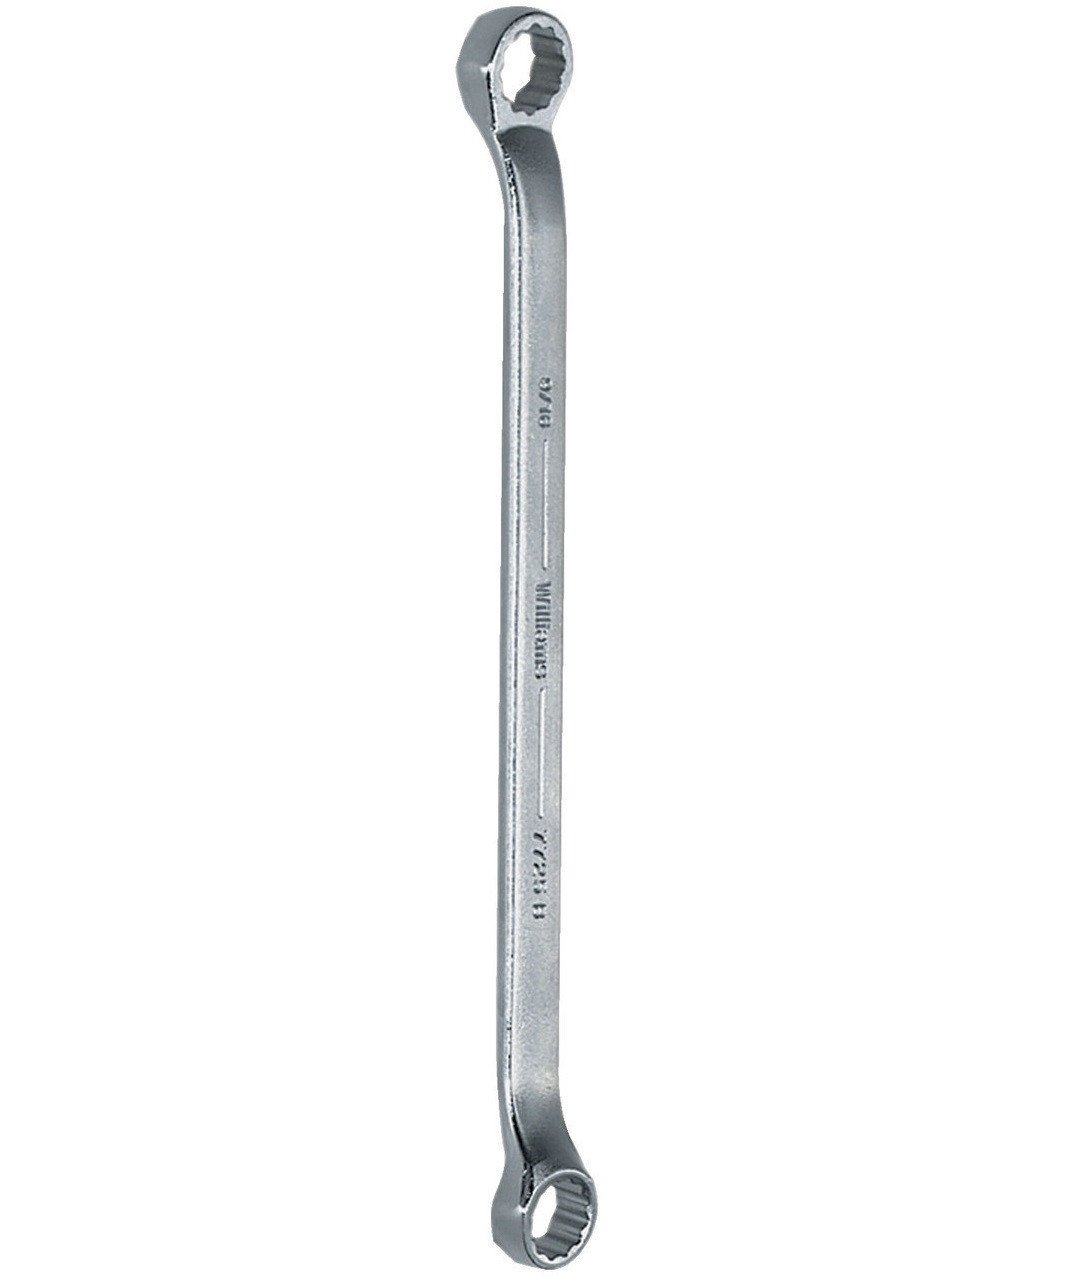 11x13MM Williams Satin Chrome Double Head 10 Degree Offset Box End Wrench 12 PT - JHWBWM-1113